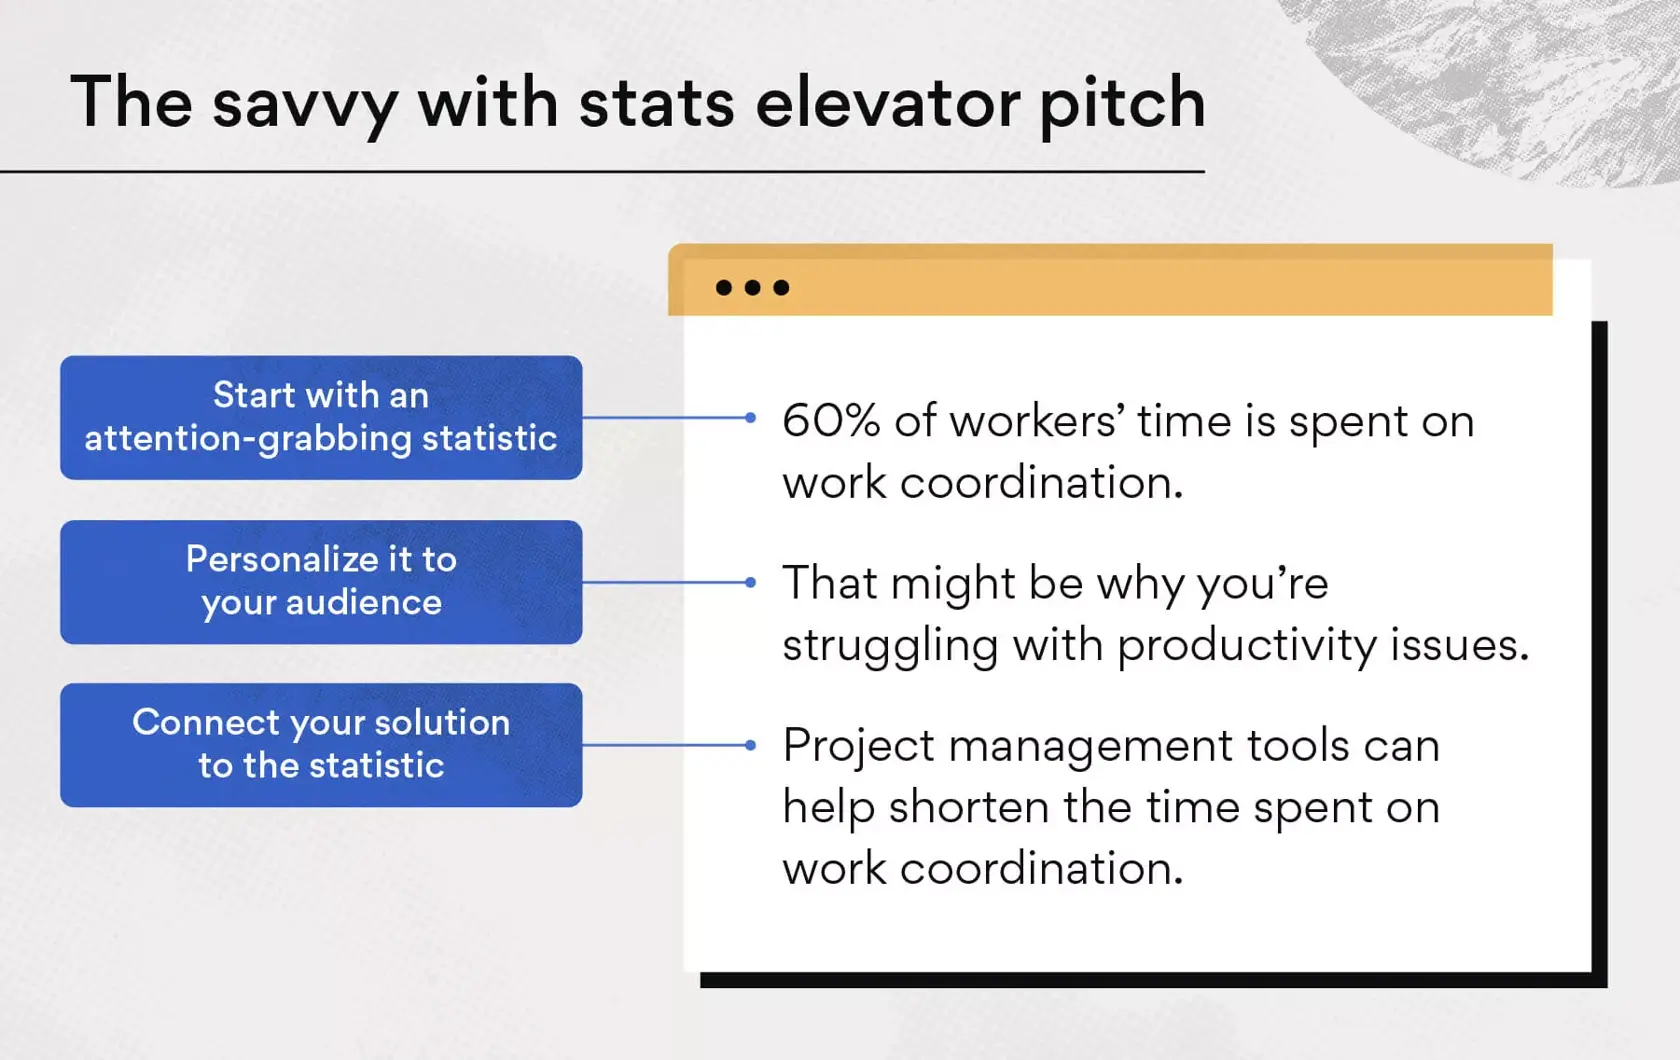 The savvy with stats elevator pitch